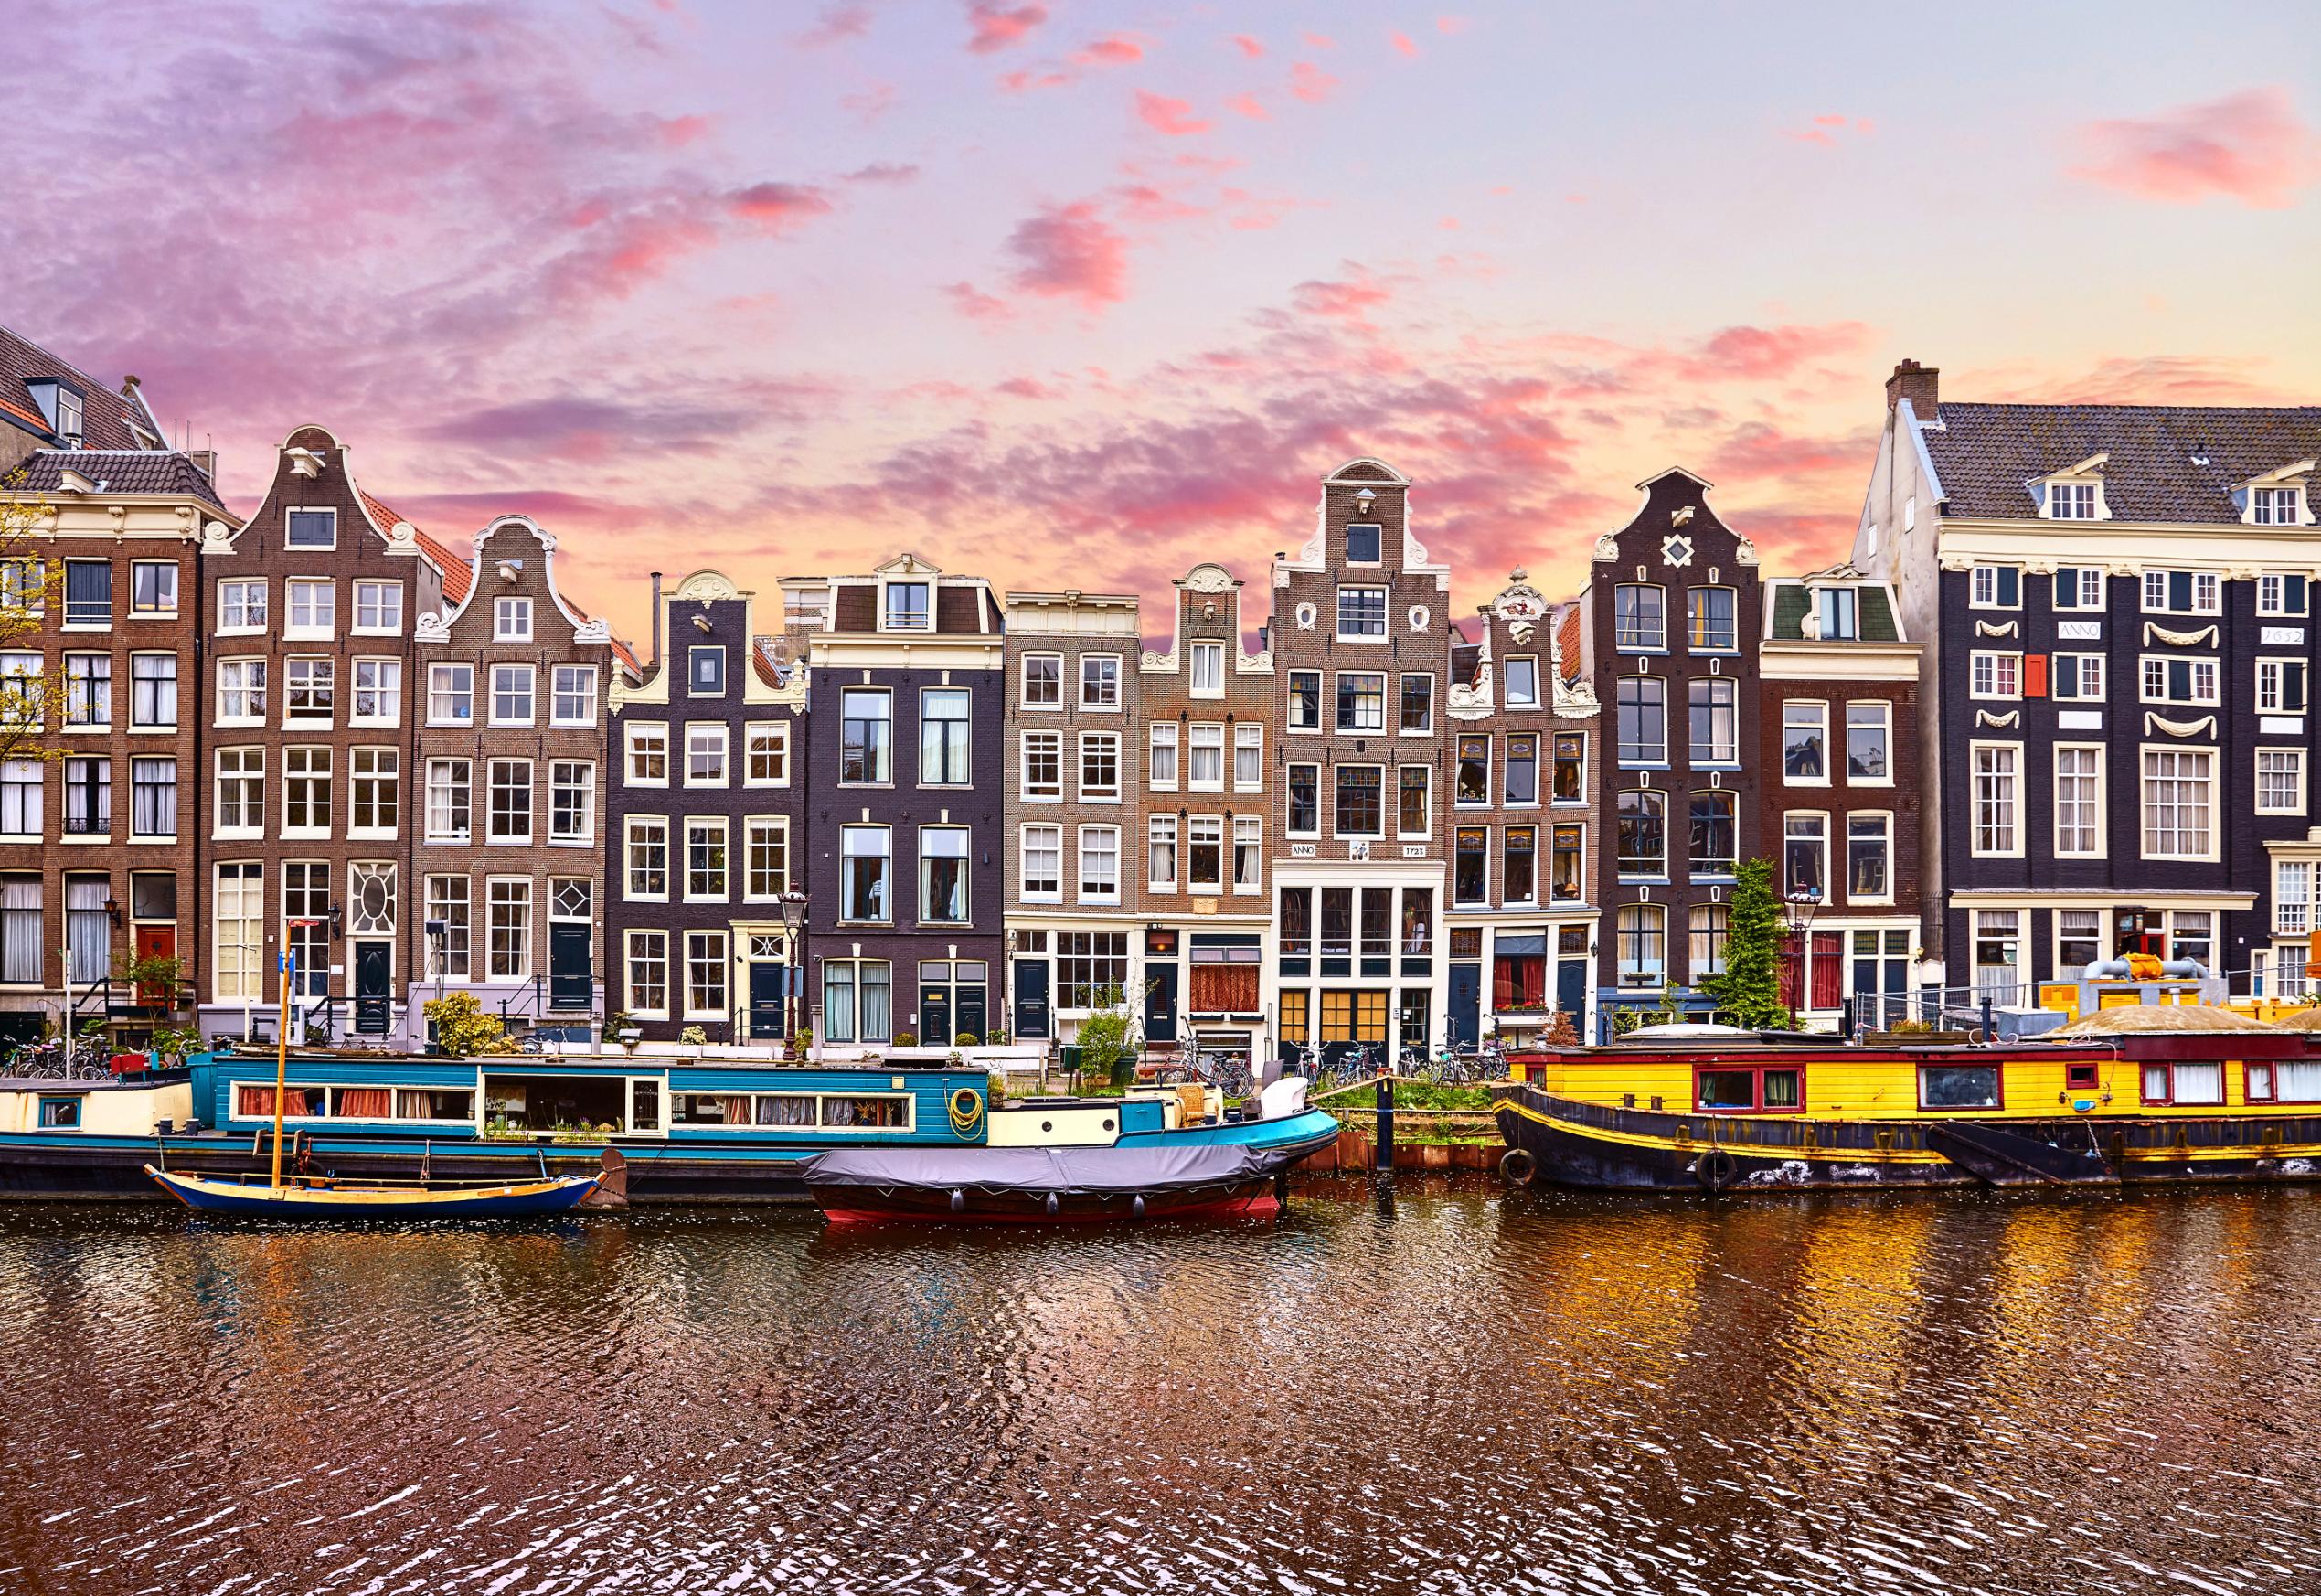 Traveling to Amsterdam during Covid-19: What you need to know before you go  | CNN Travel